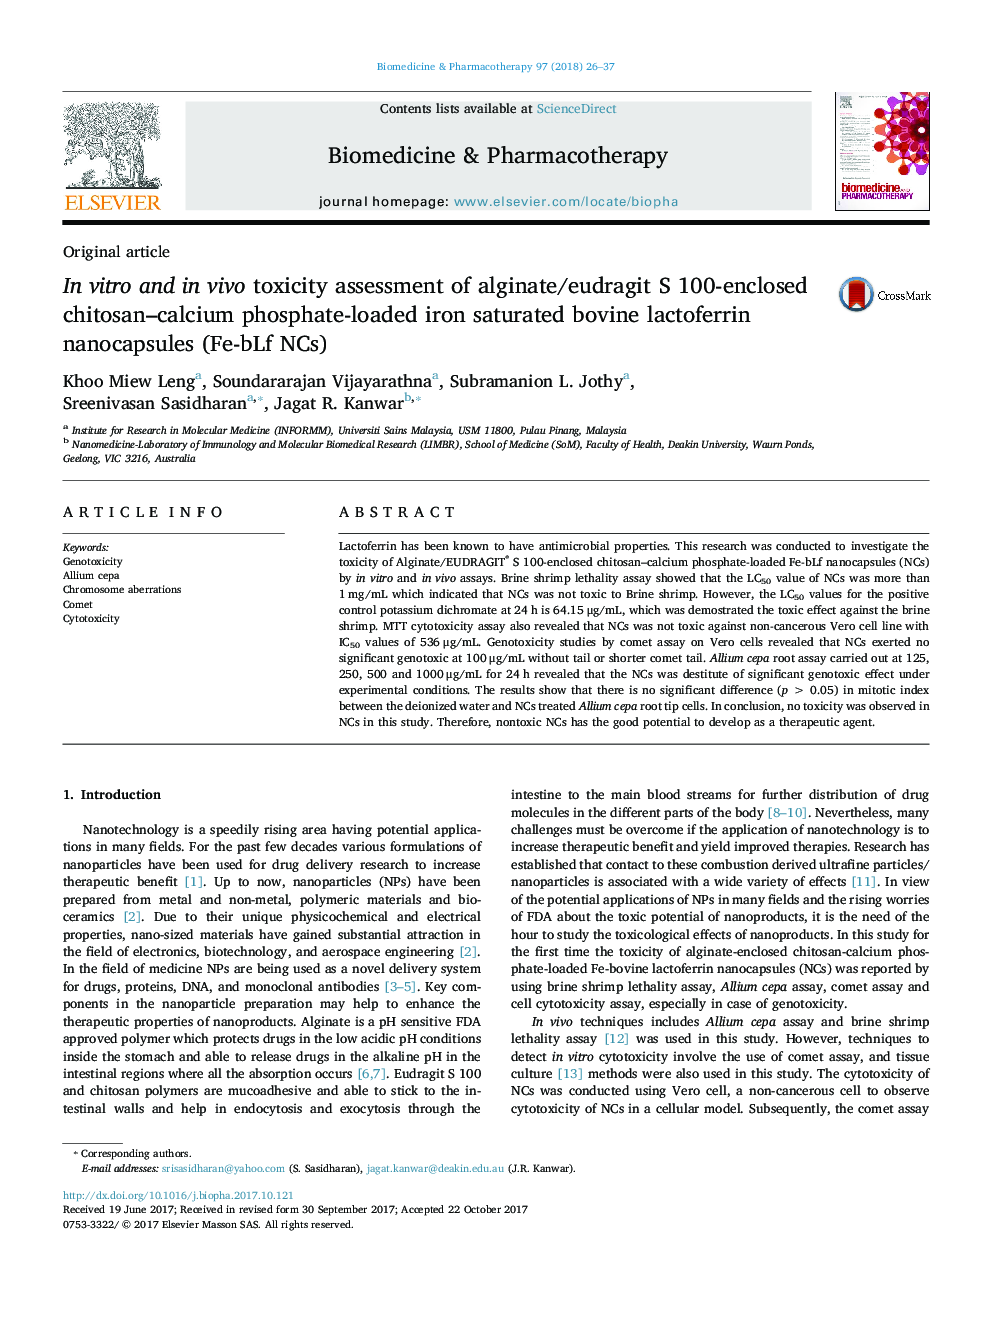 In vitro and in vivo toxicity assessment of alginate/eudragit S 100-enclosed chitosan-calcium phosphate-loaded iron saturated bovine lactoferrin nanocapsules (Fe-bLf NCs)